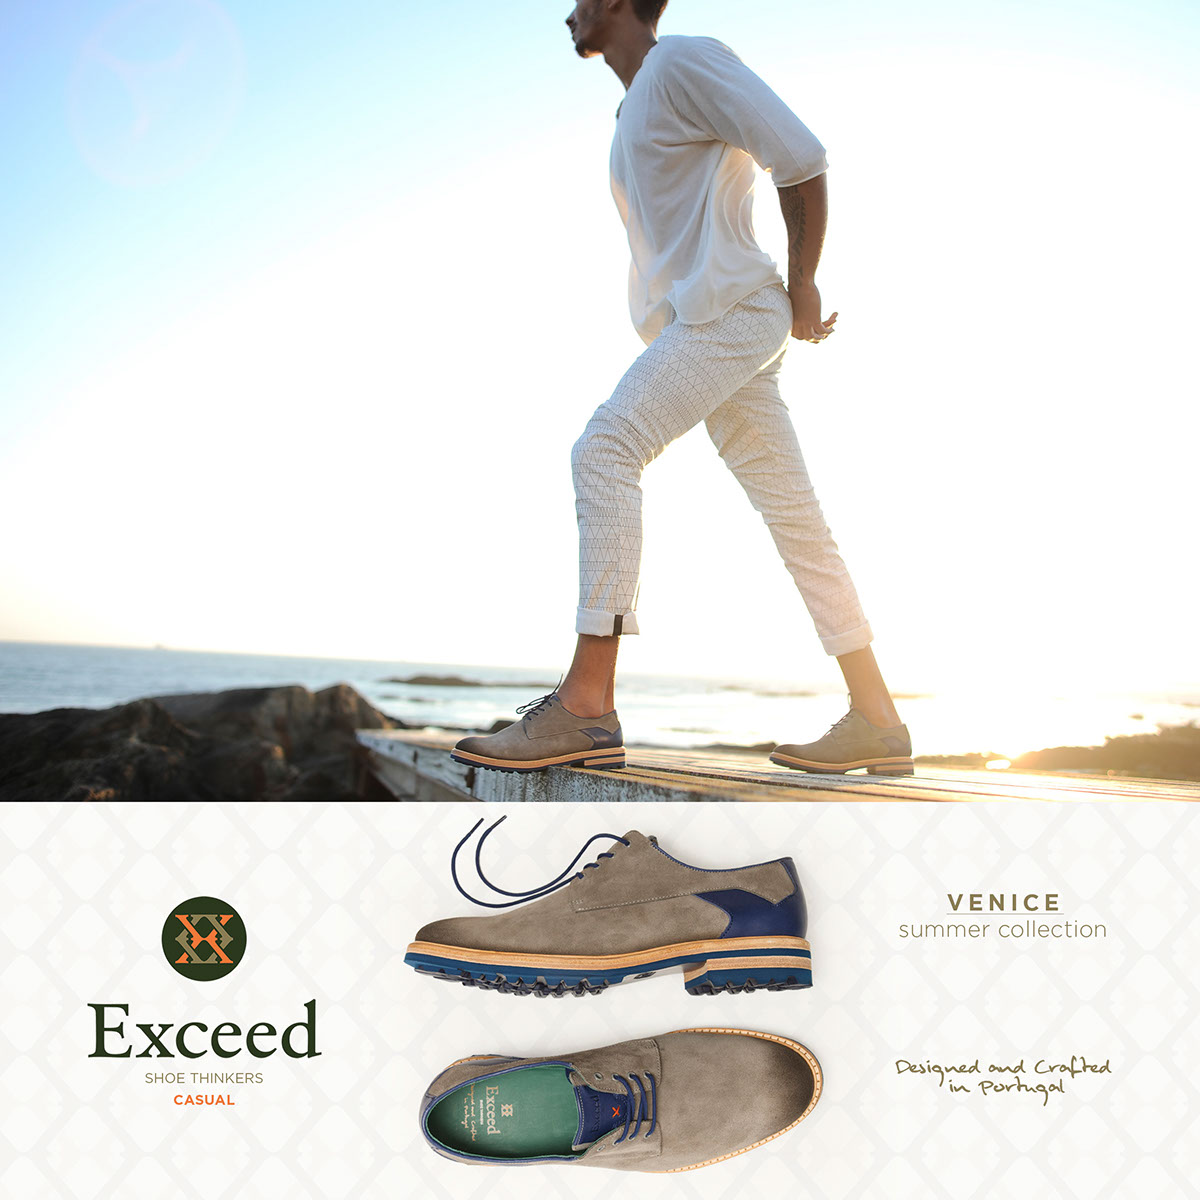 "Exceed Shoe Thinkers" "Exceed Shoes" "Exceed" "Summer 16"